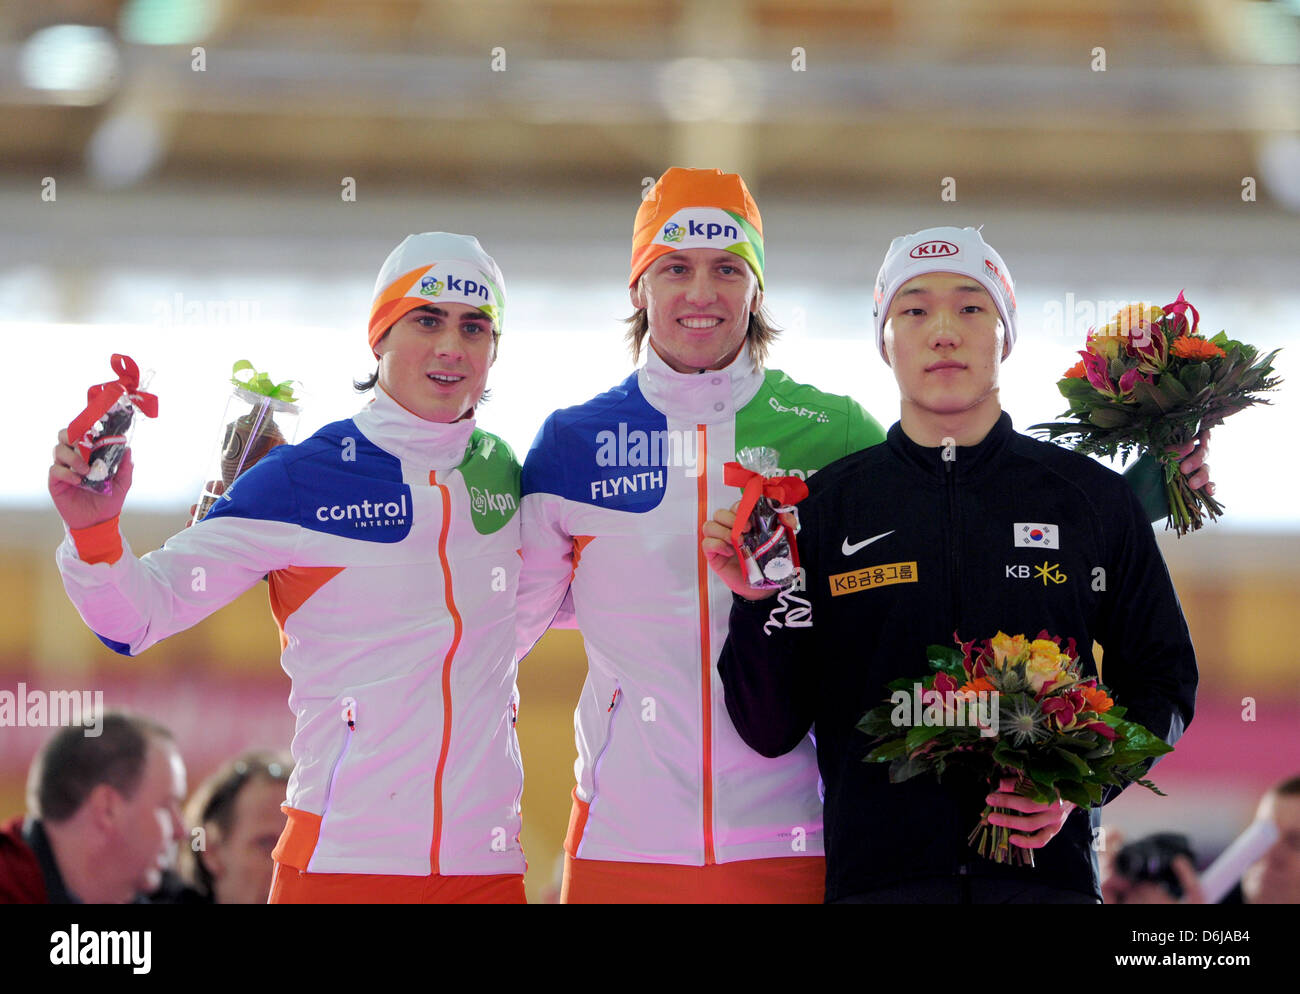 First place in the 500 m distance Michel Mulder from the Netherlands, second place Tae-Bum Mo from Korea (R) and third place Jan Smeekens from the Netherlands (L) stand  during the medal ceremony at the Speed Skating World Cup in Berlin, Germany, 10 March 2012. Photo: SOEREN STACHE Stock Photo